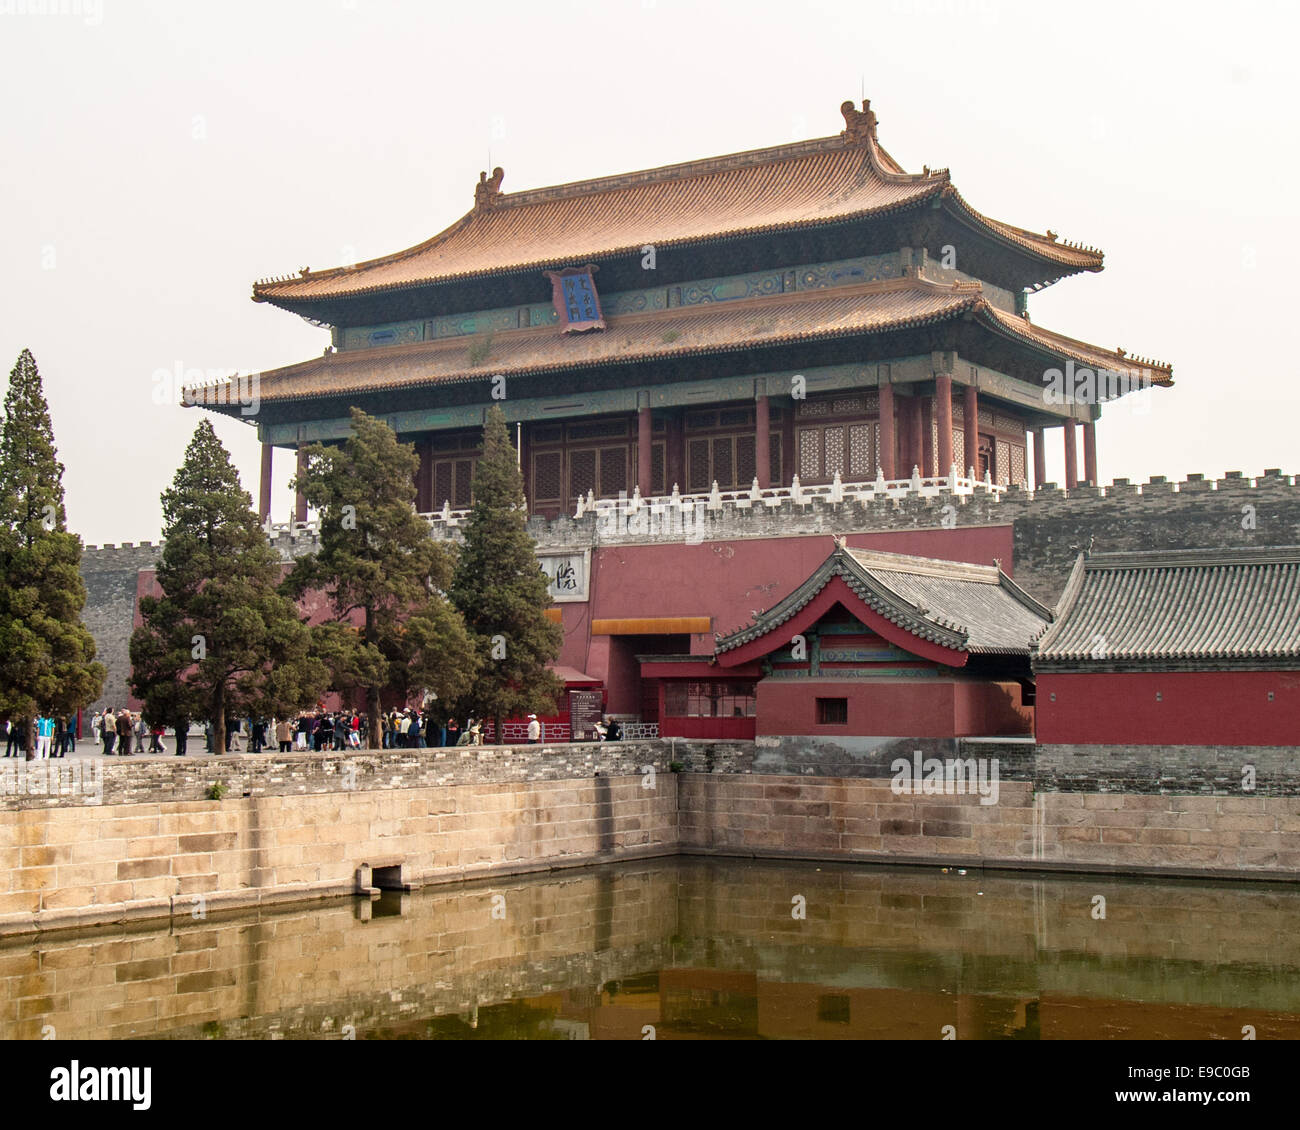 Beijing, China. 18th Oct, 2006. Viewed across the moat is the northern gate into the Forbidden City, The Gate of Divine Might (Shenwumen) or Gate of Divine Prowess. In the center of Beijing, the Forbidden City complex of 980 buildings, built in 1406-1420, was the Chinese imperial palace for 500 years from the Ming dynasty to the end of the Qing dynasty and was home to emperors and their households, as well as the ceremonial and political center of Chinese government. © Arnold Drapkin/ZUMA Wire/Alamy Live News Stock Photo